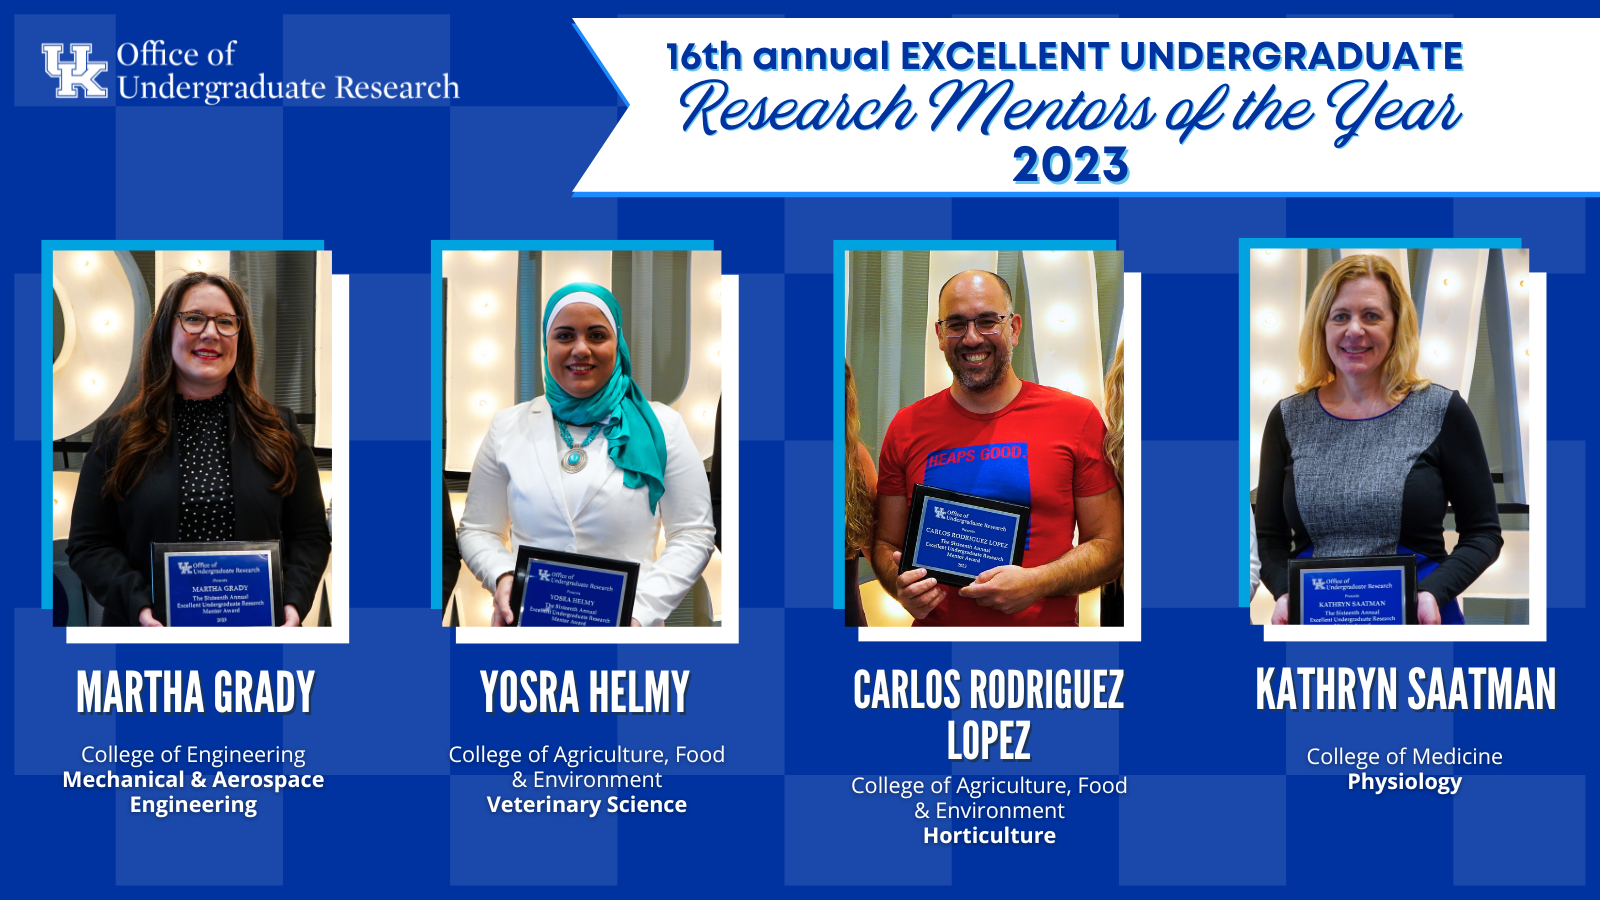 2023 Research Mentor of the Year University of Kentucky